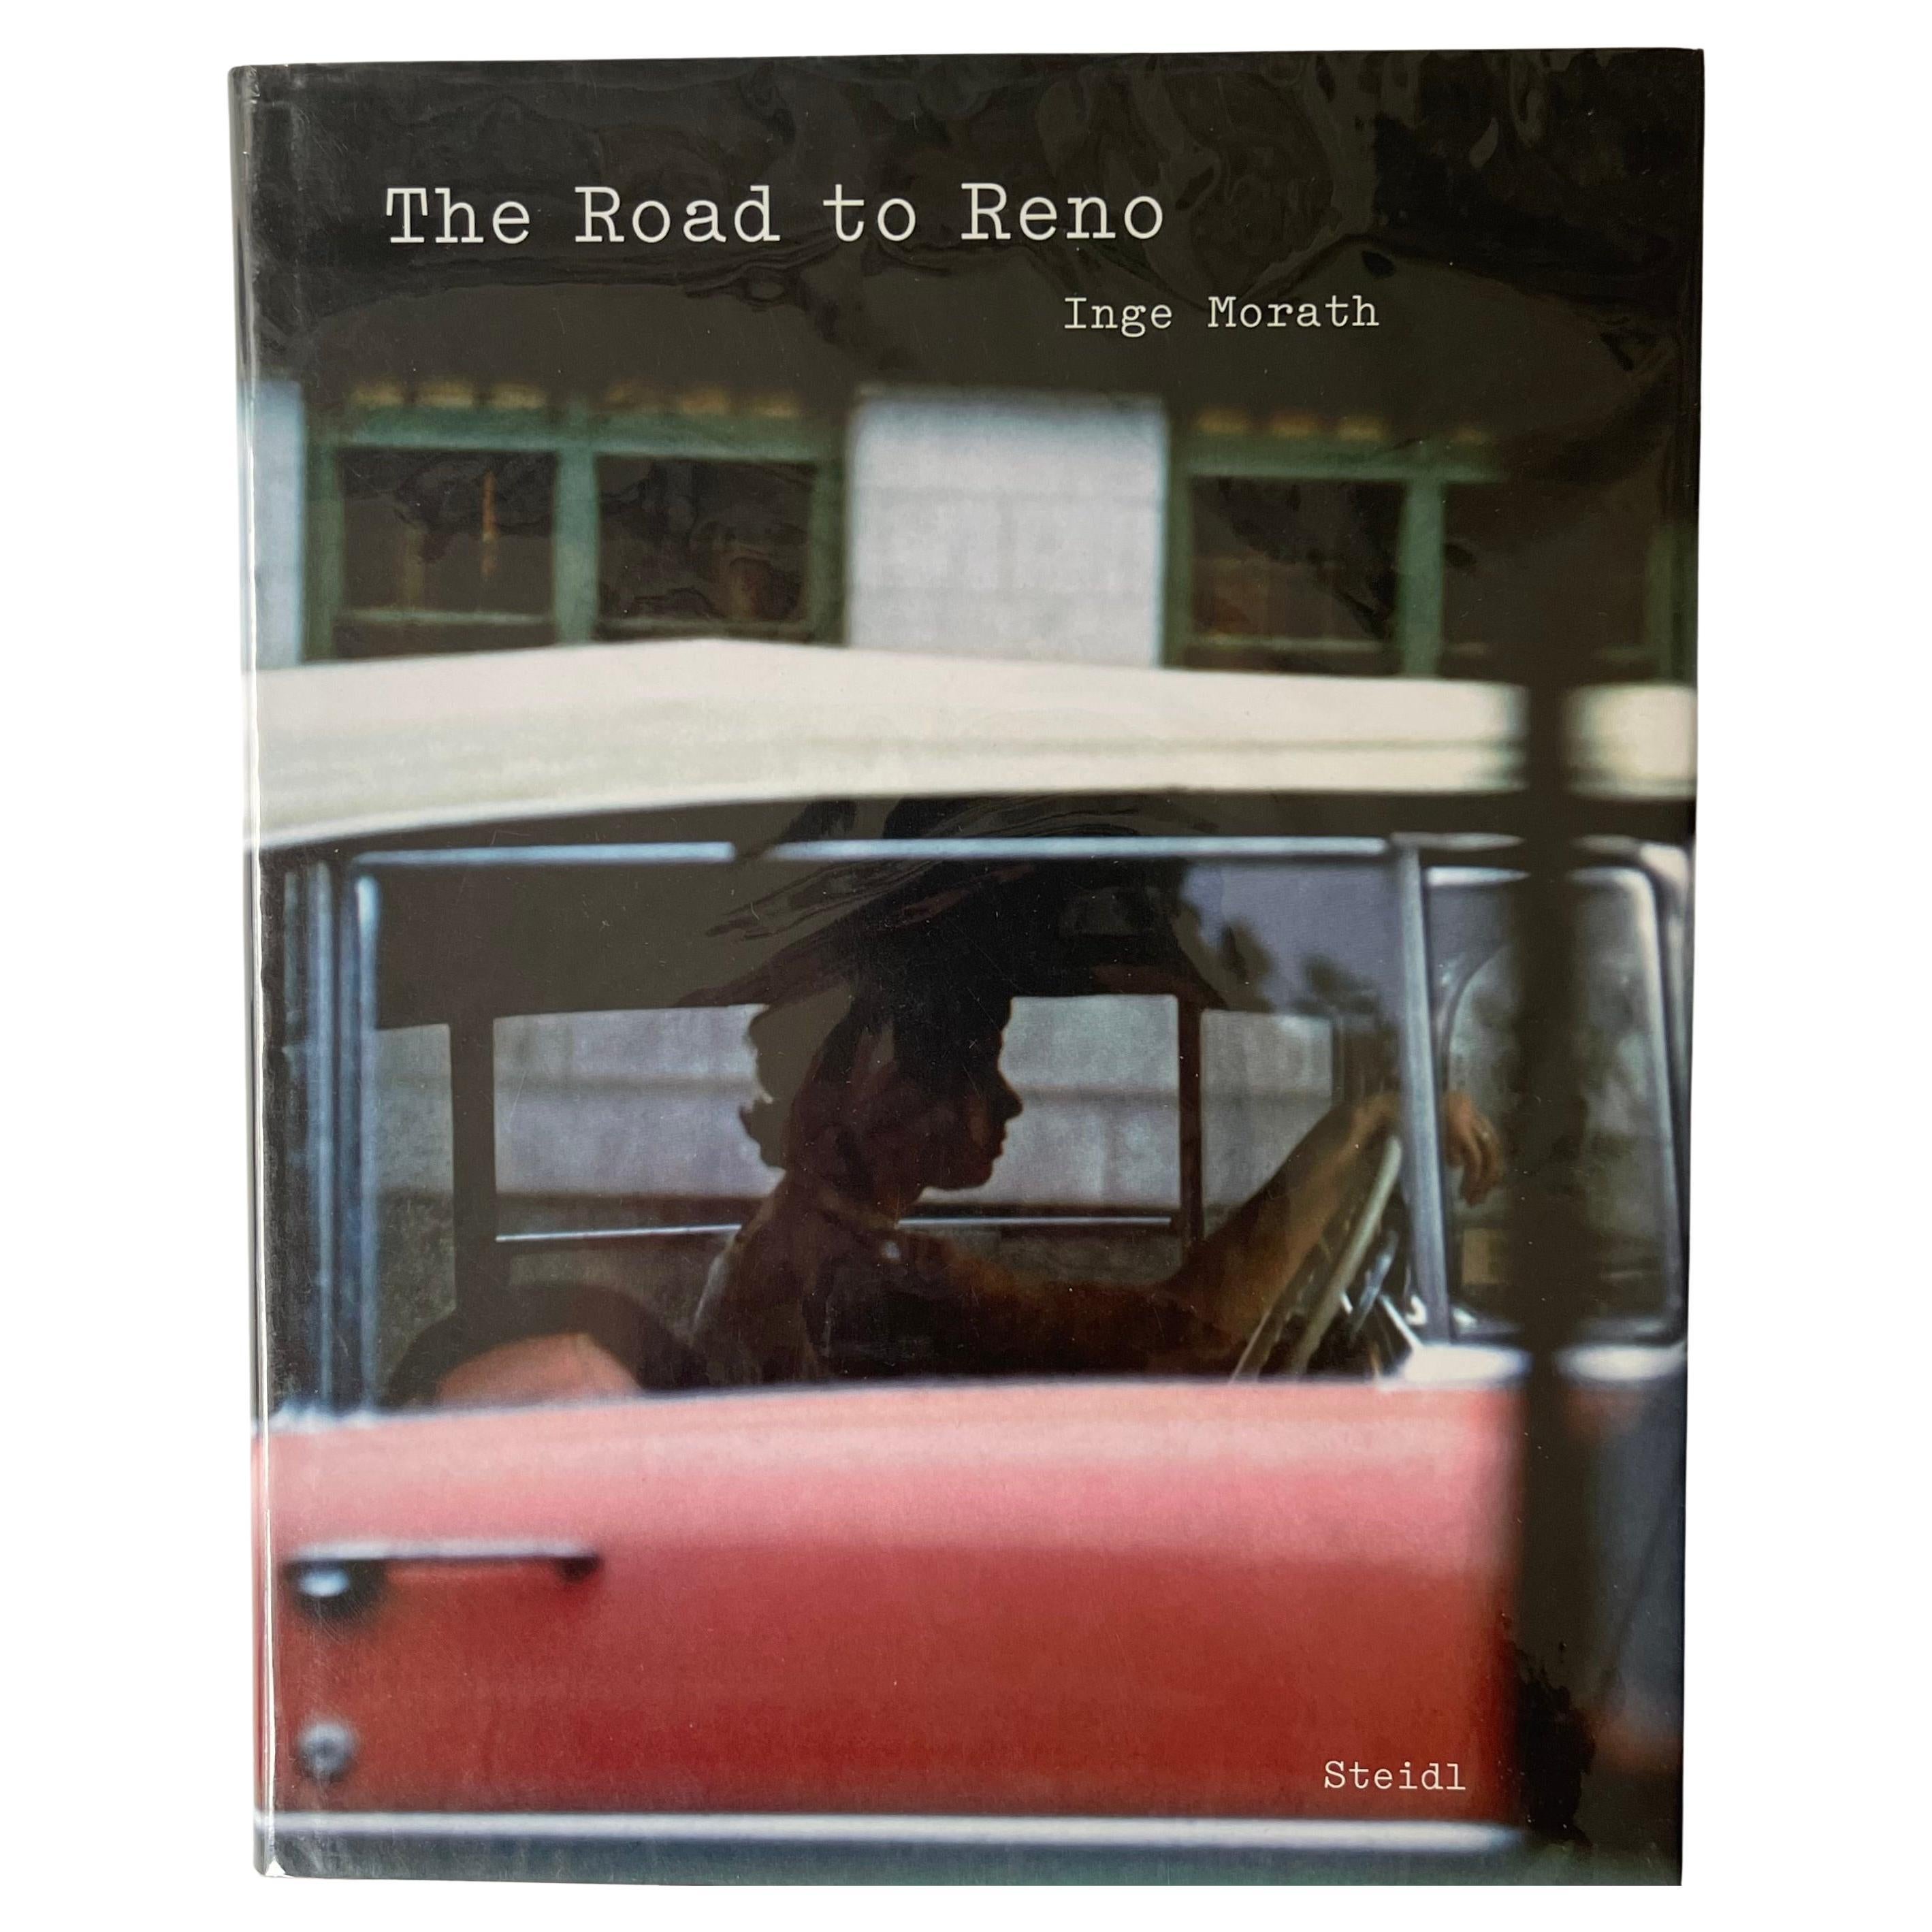 The Road to Reno - Inge Morath - 1st Edition, Steidl, 2006 For Sale